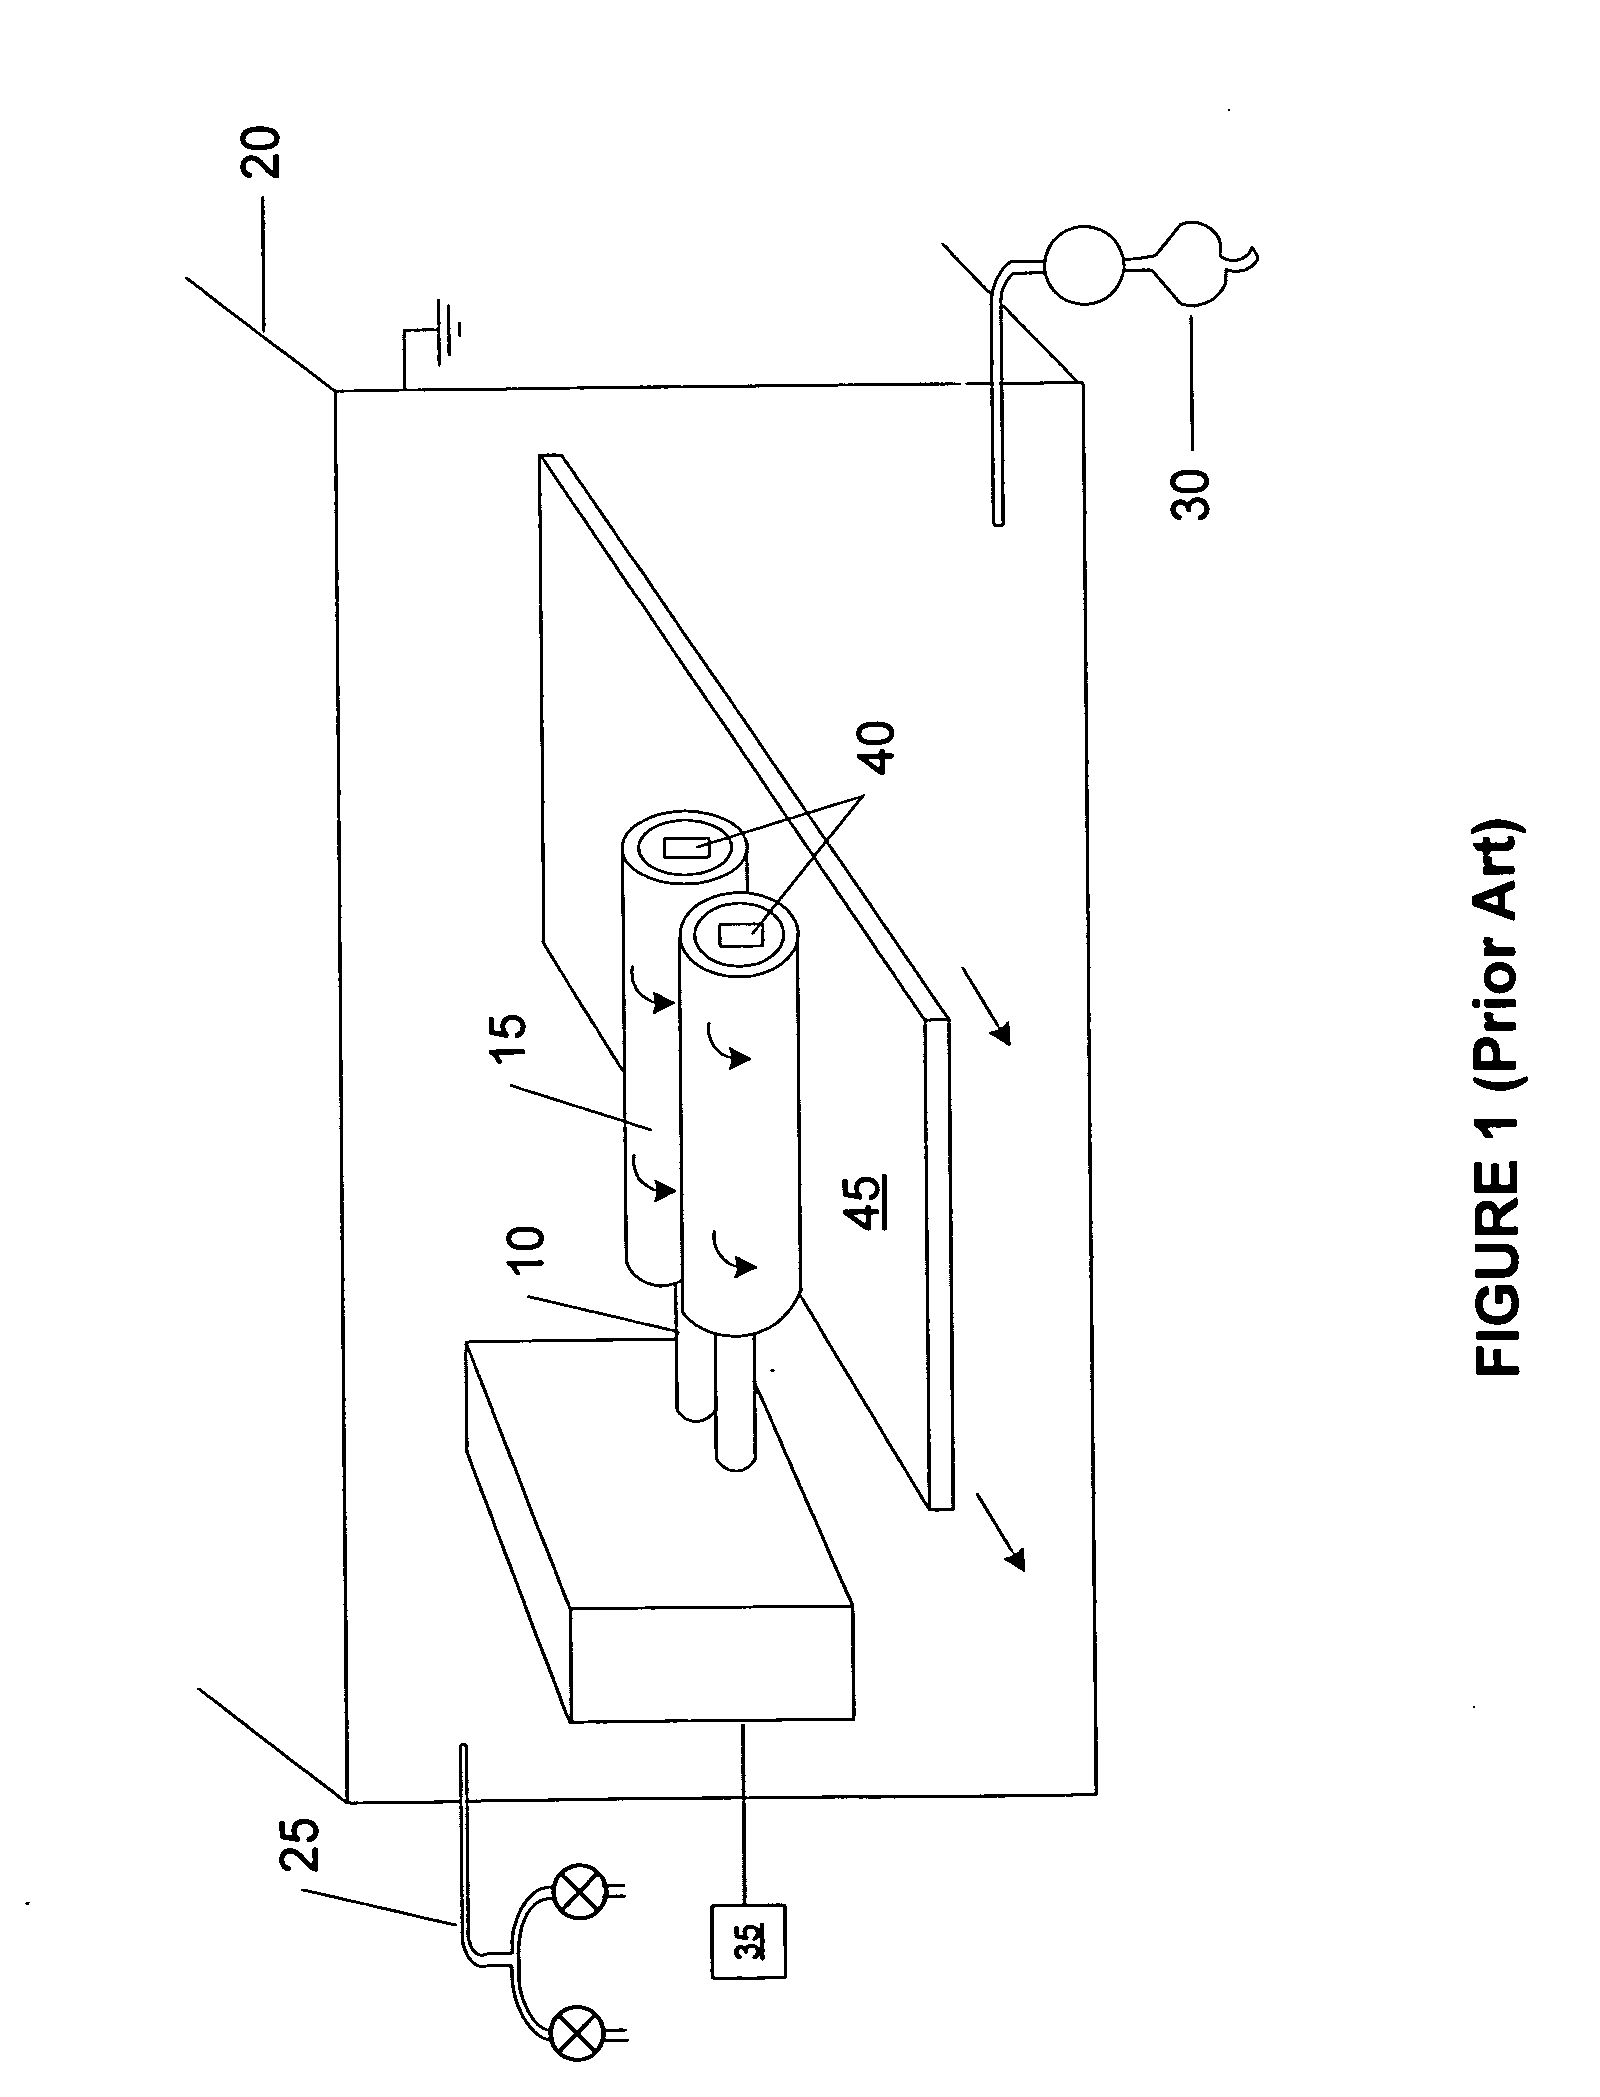 System and method for modulating power signals to control sputtering